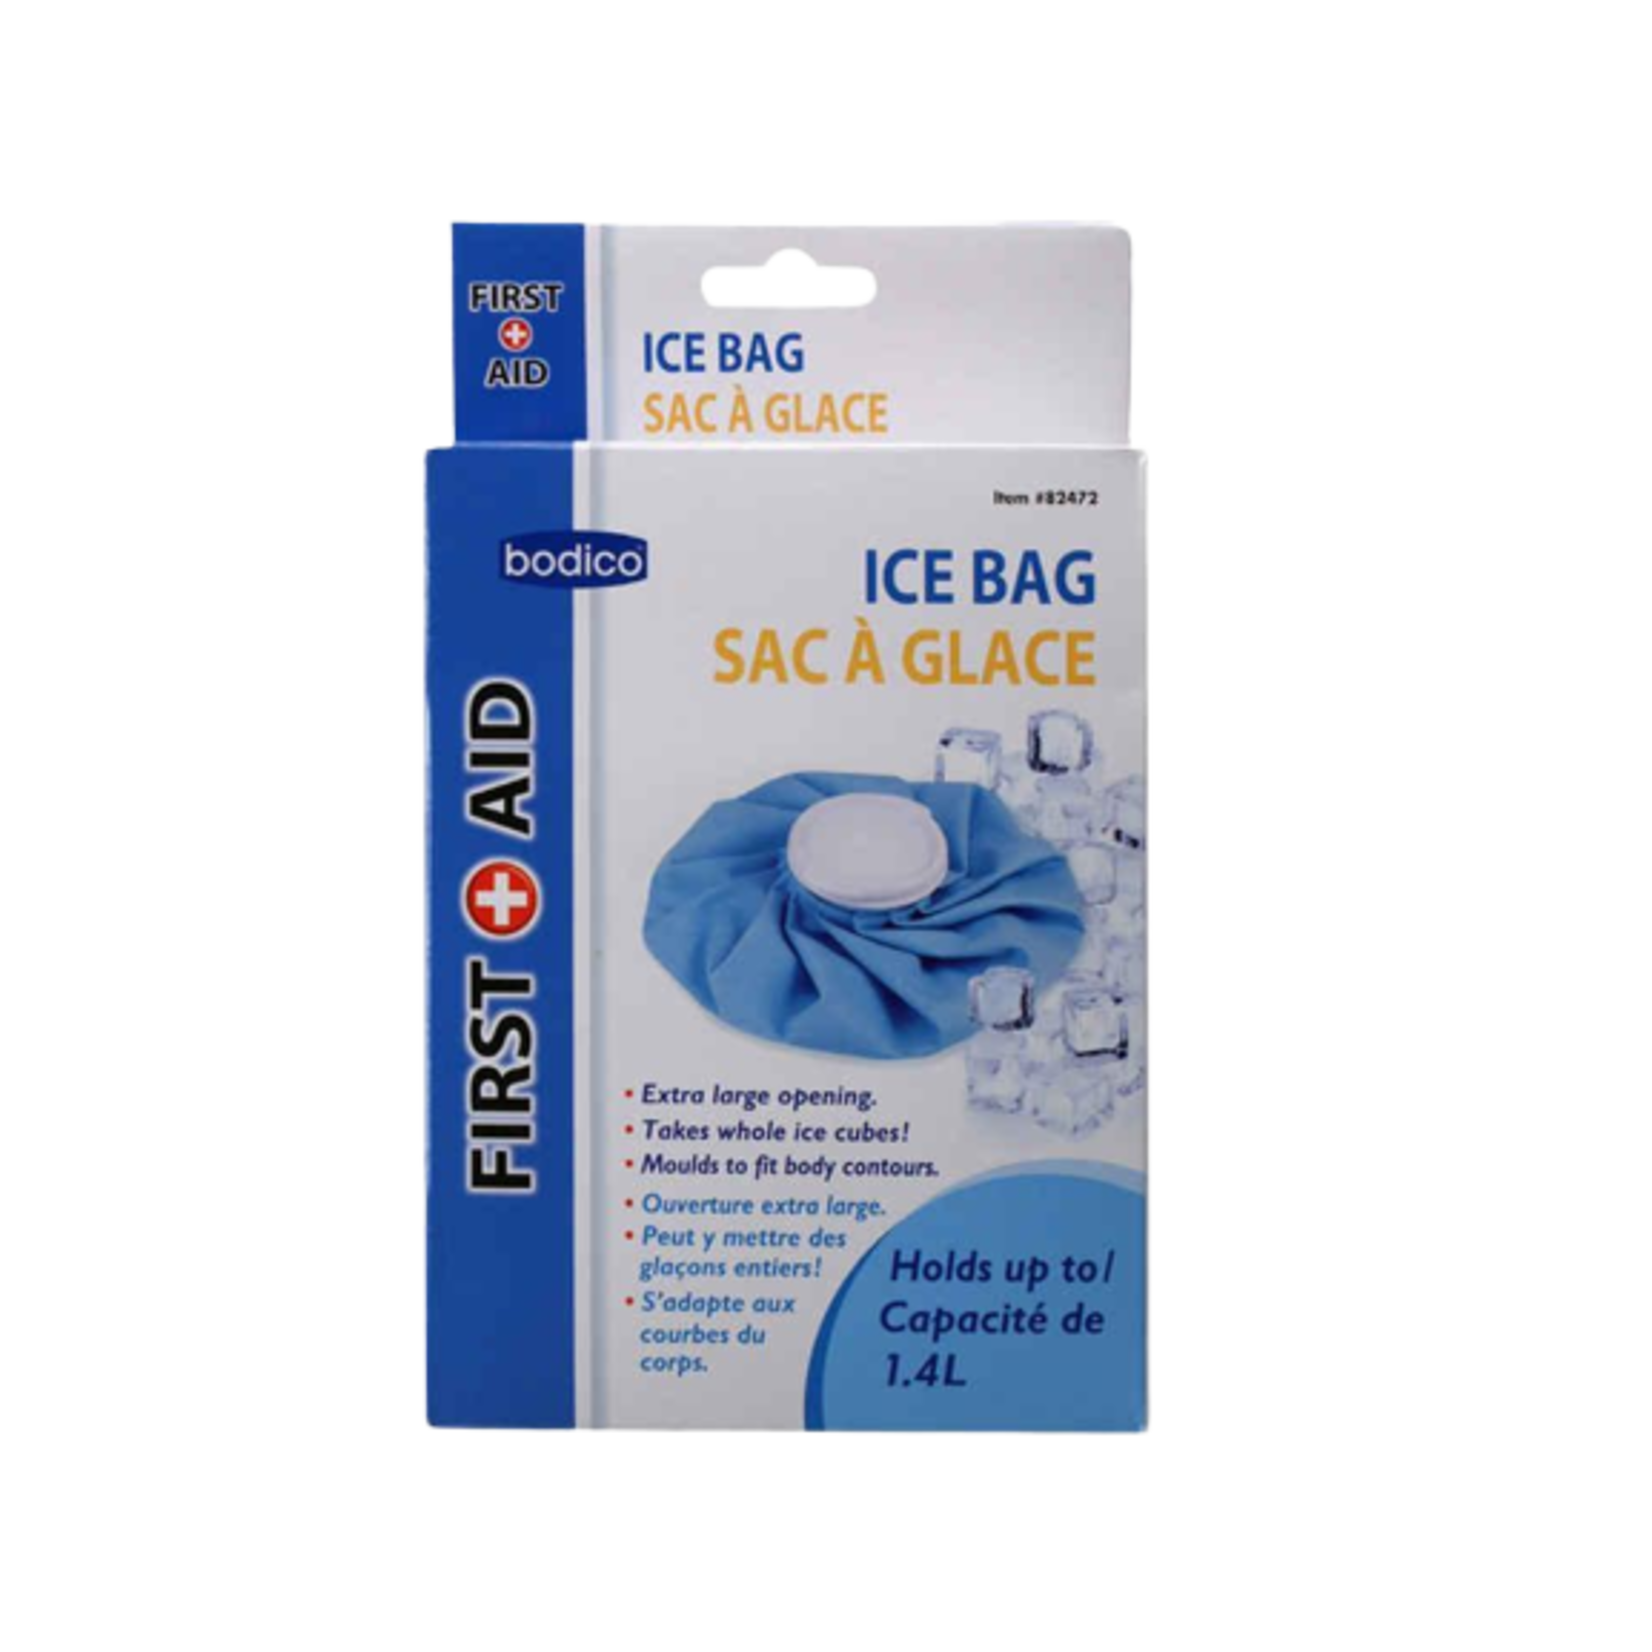 BODICO ICE BAG, HOLDS UP TO 1.4 L